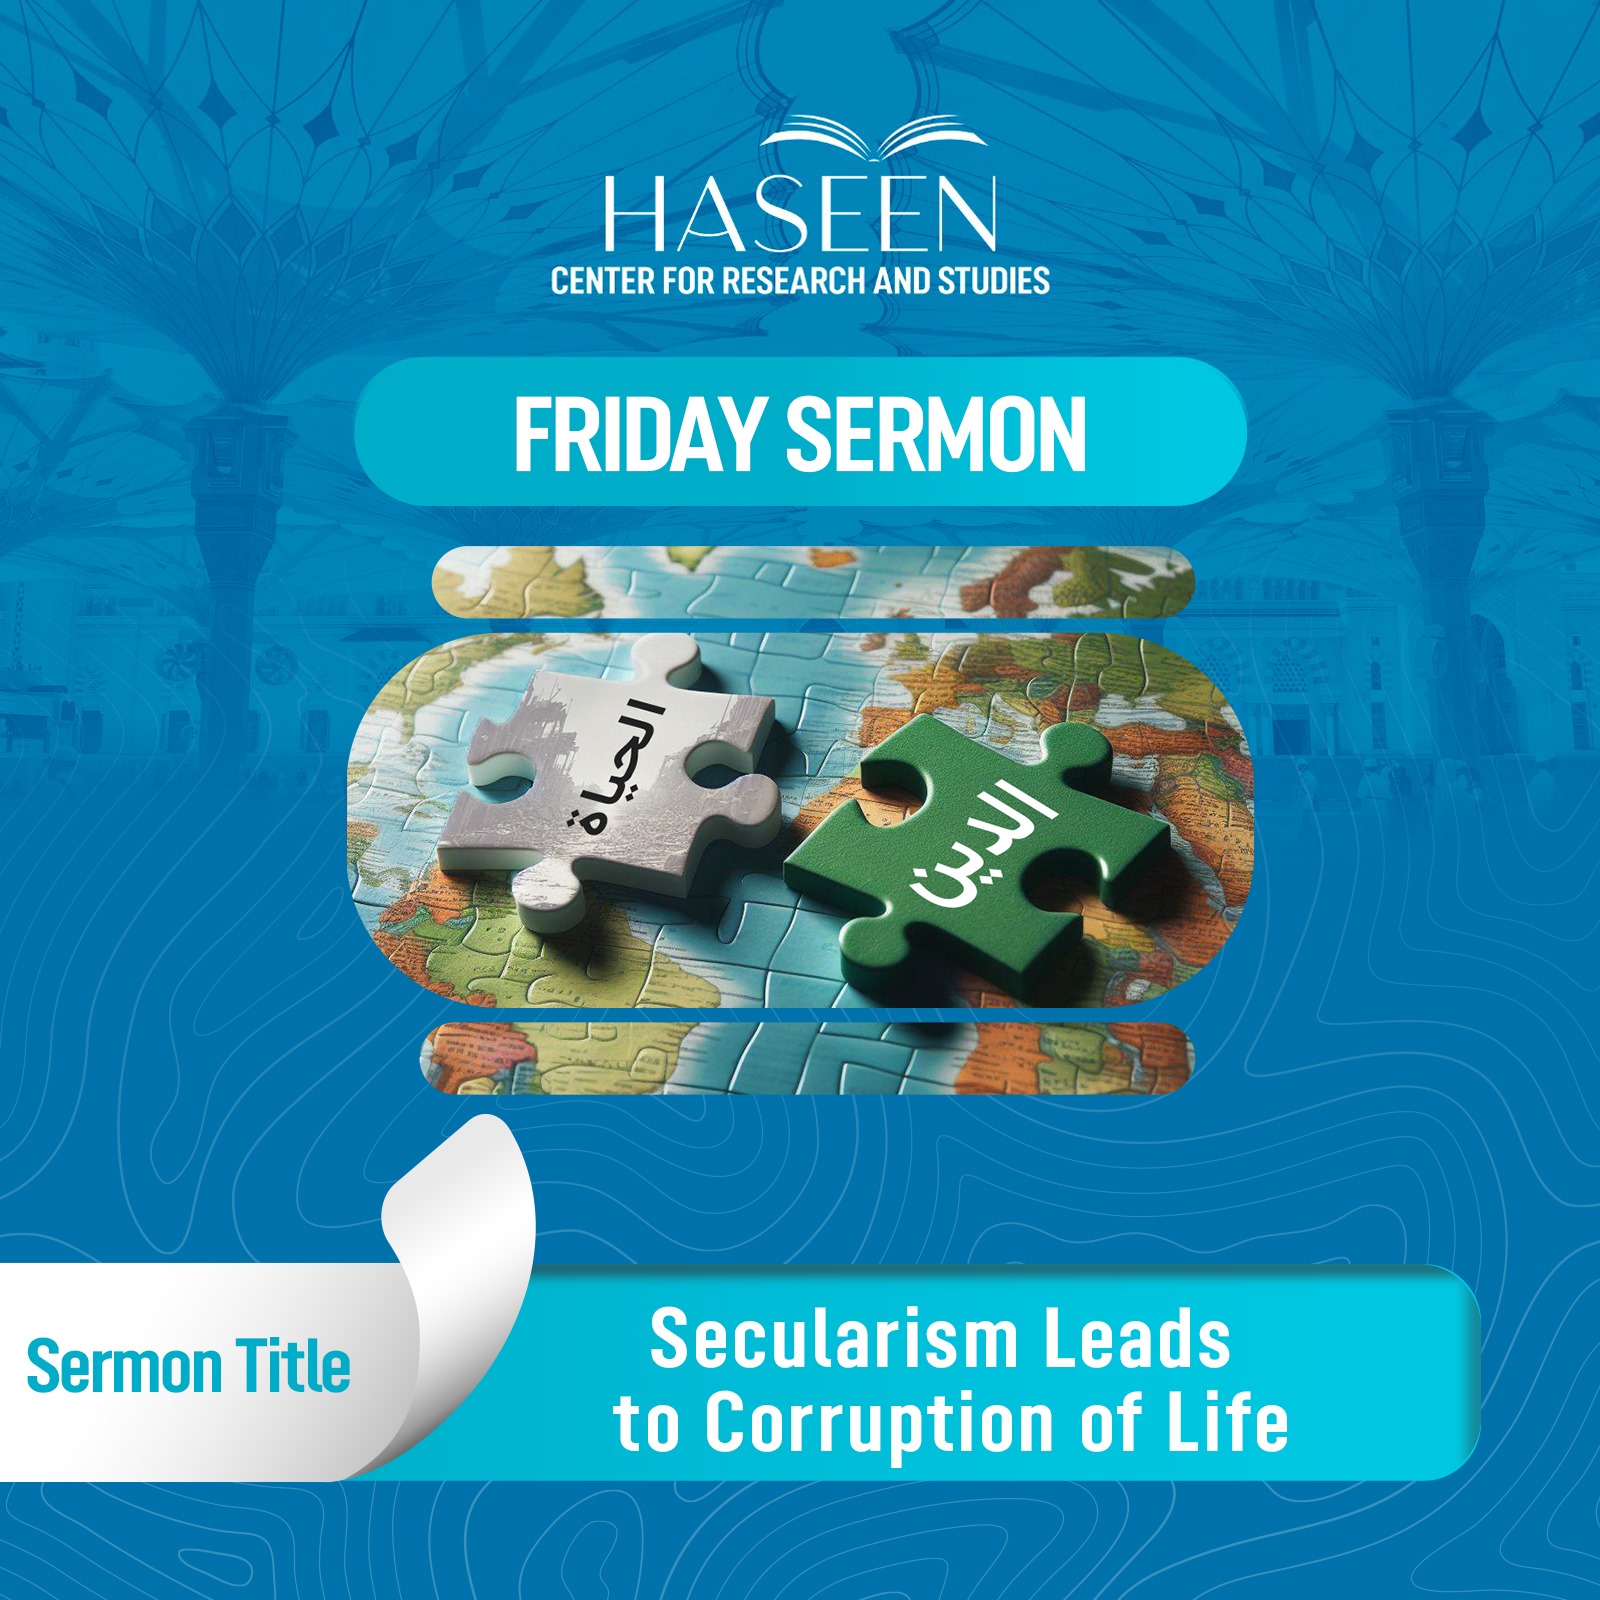 Title of Sermon: Secularism Leads to Corruption of Life